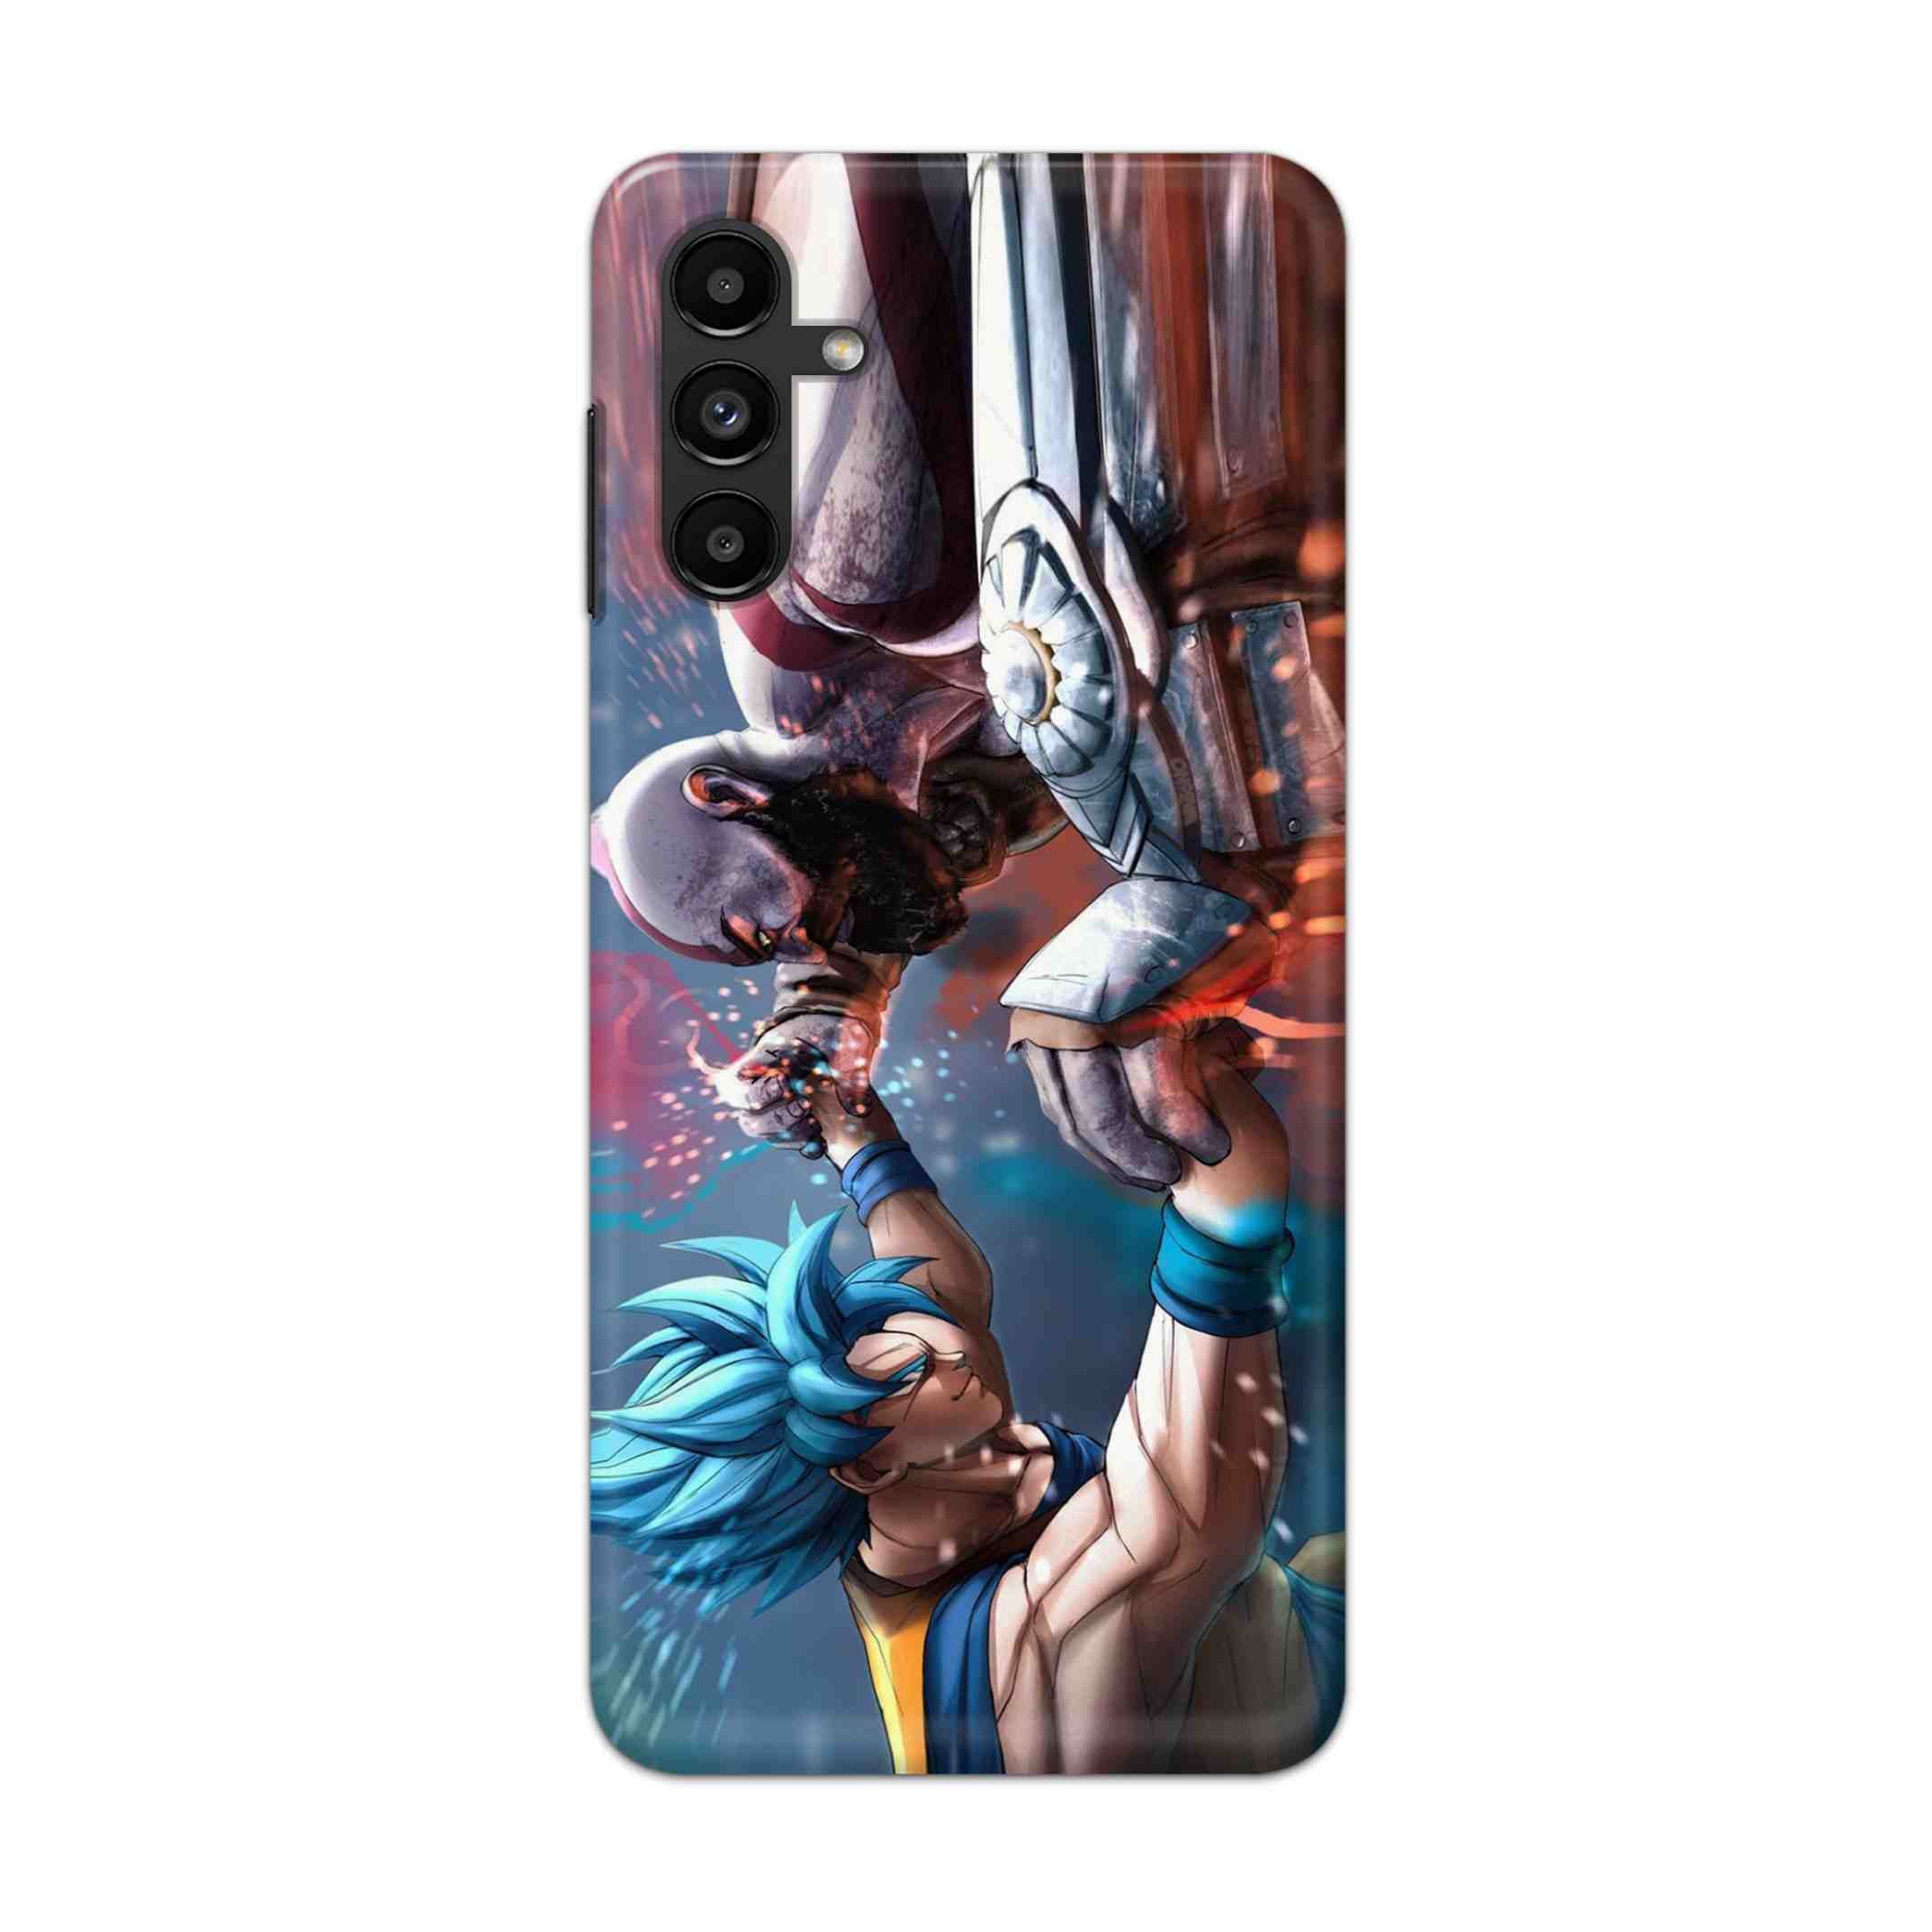 Buy Goku Vs Kratos Hard Back Mobile Phone Case/Cover For Galaxy A13 (5G) Online